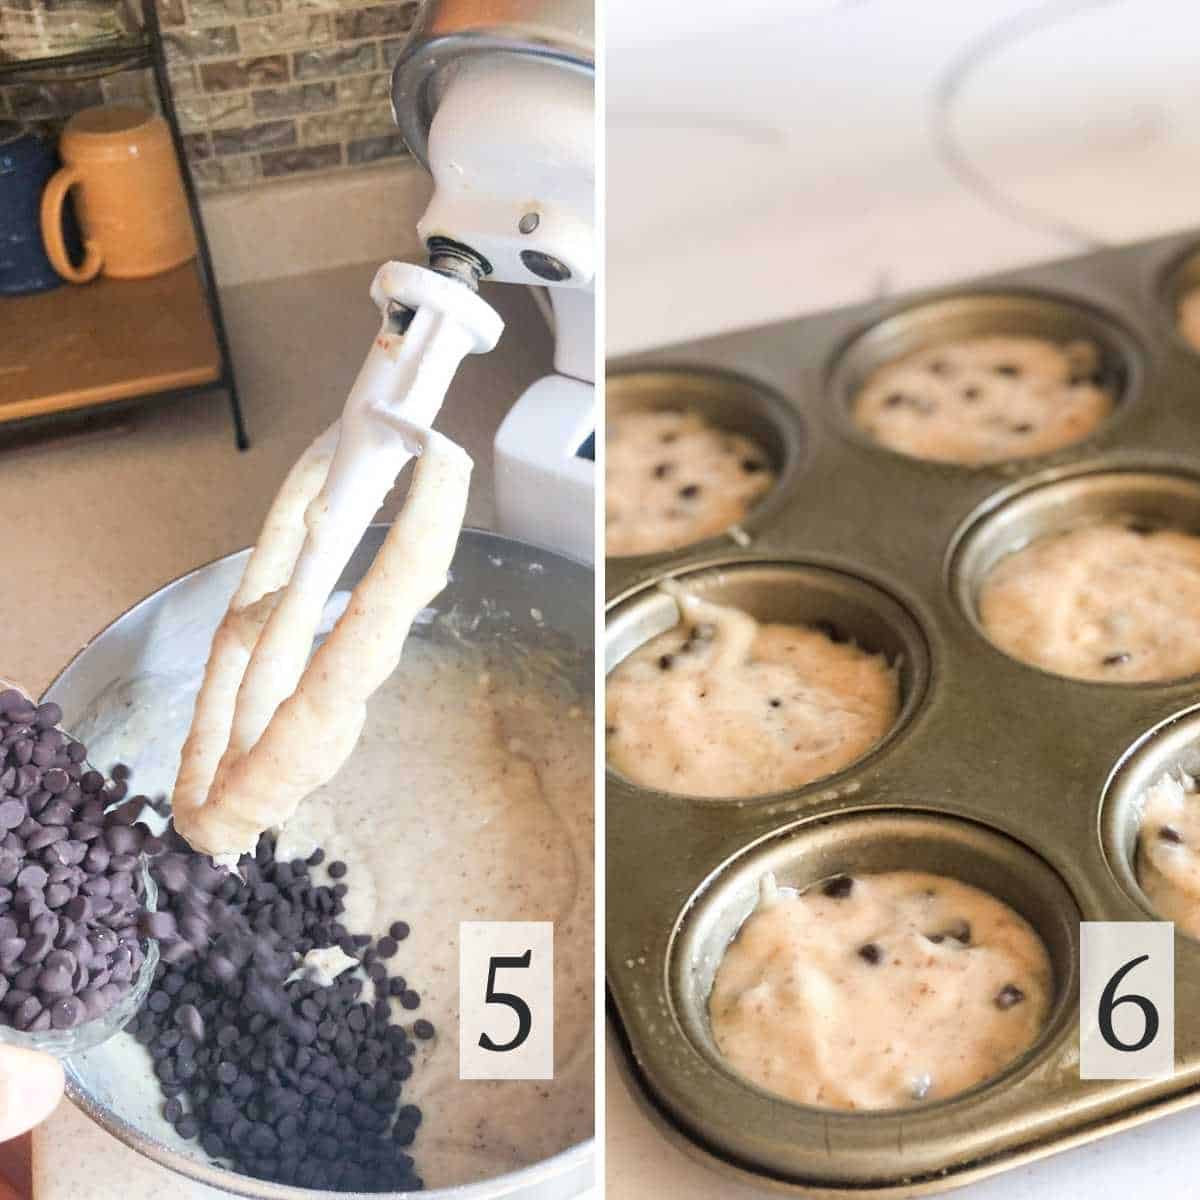 Mixing in chocolate chips and filling the muffin tin with batter.